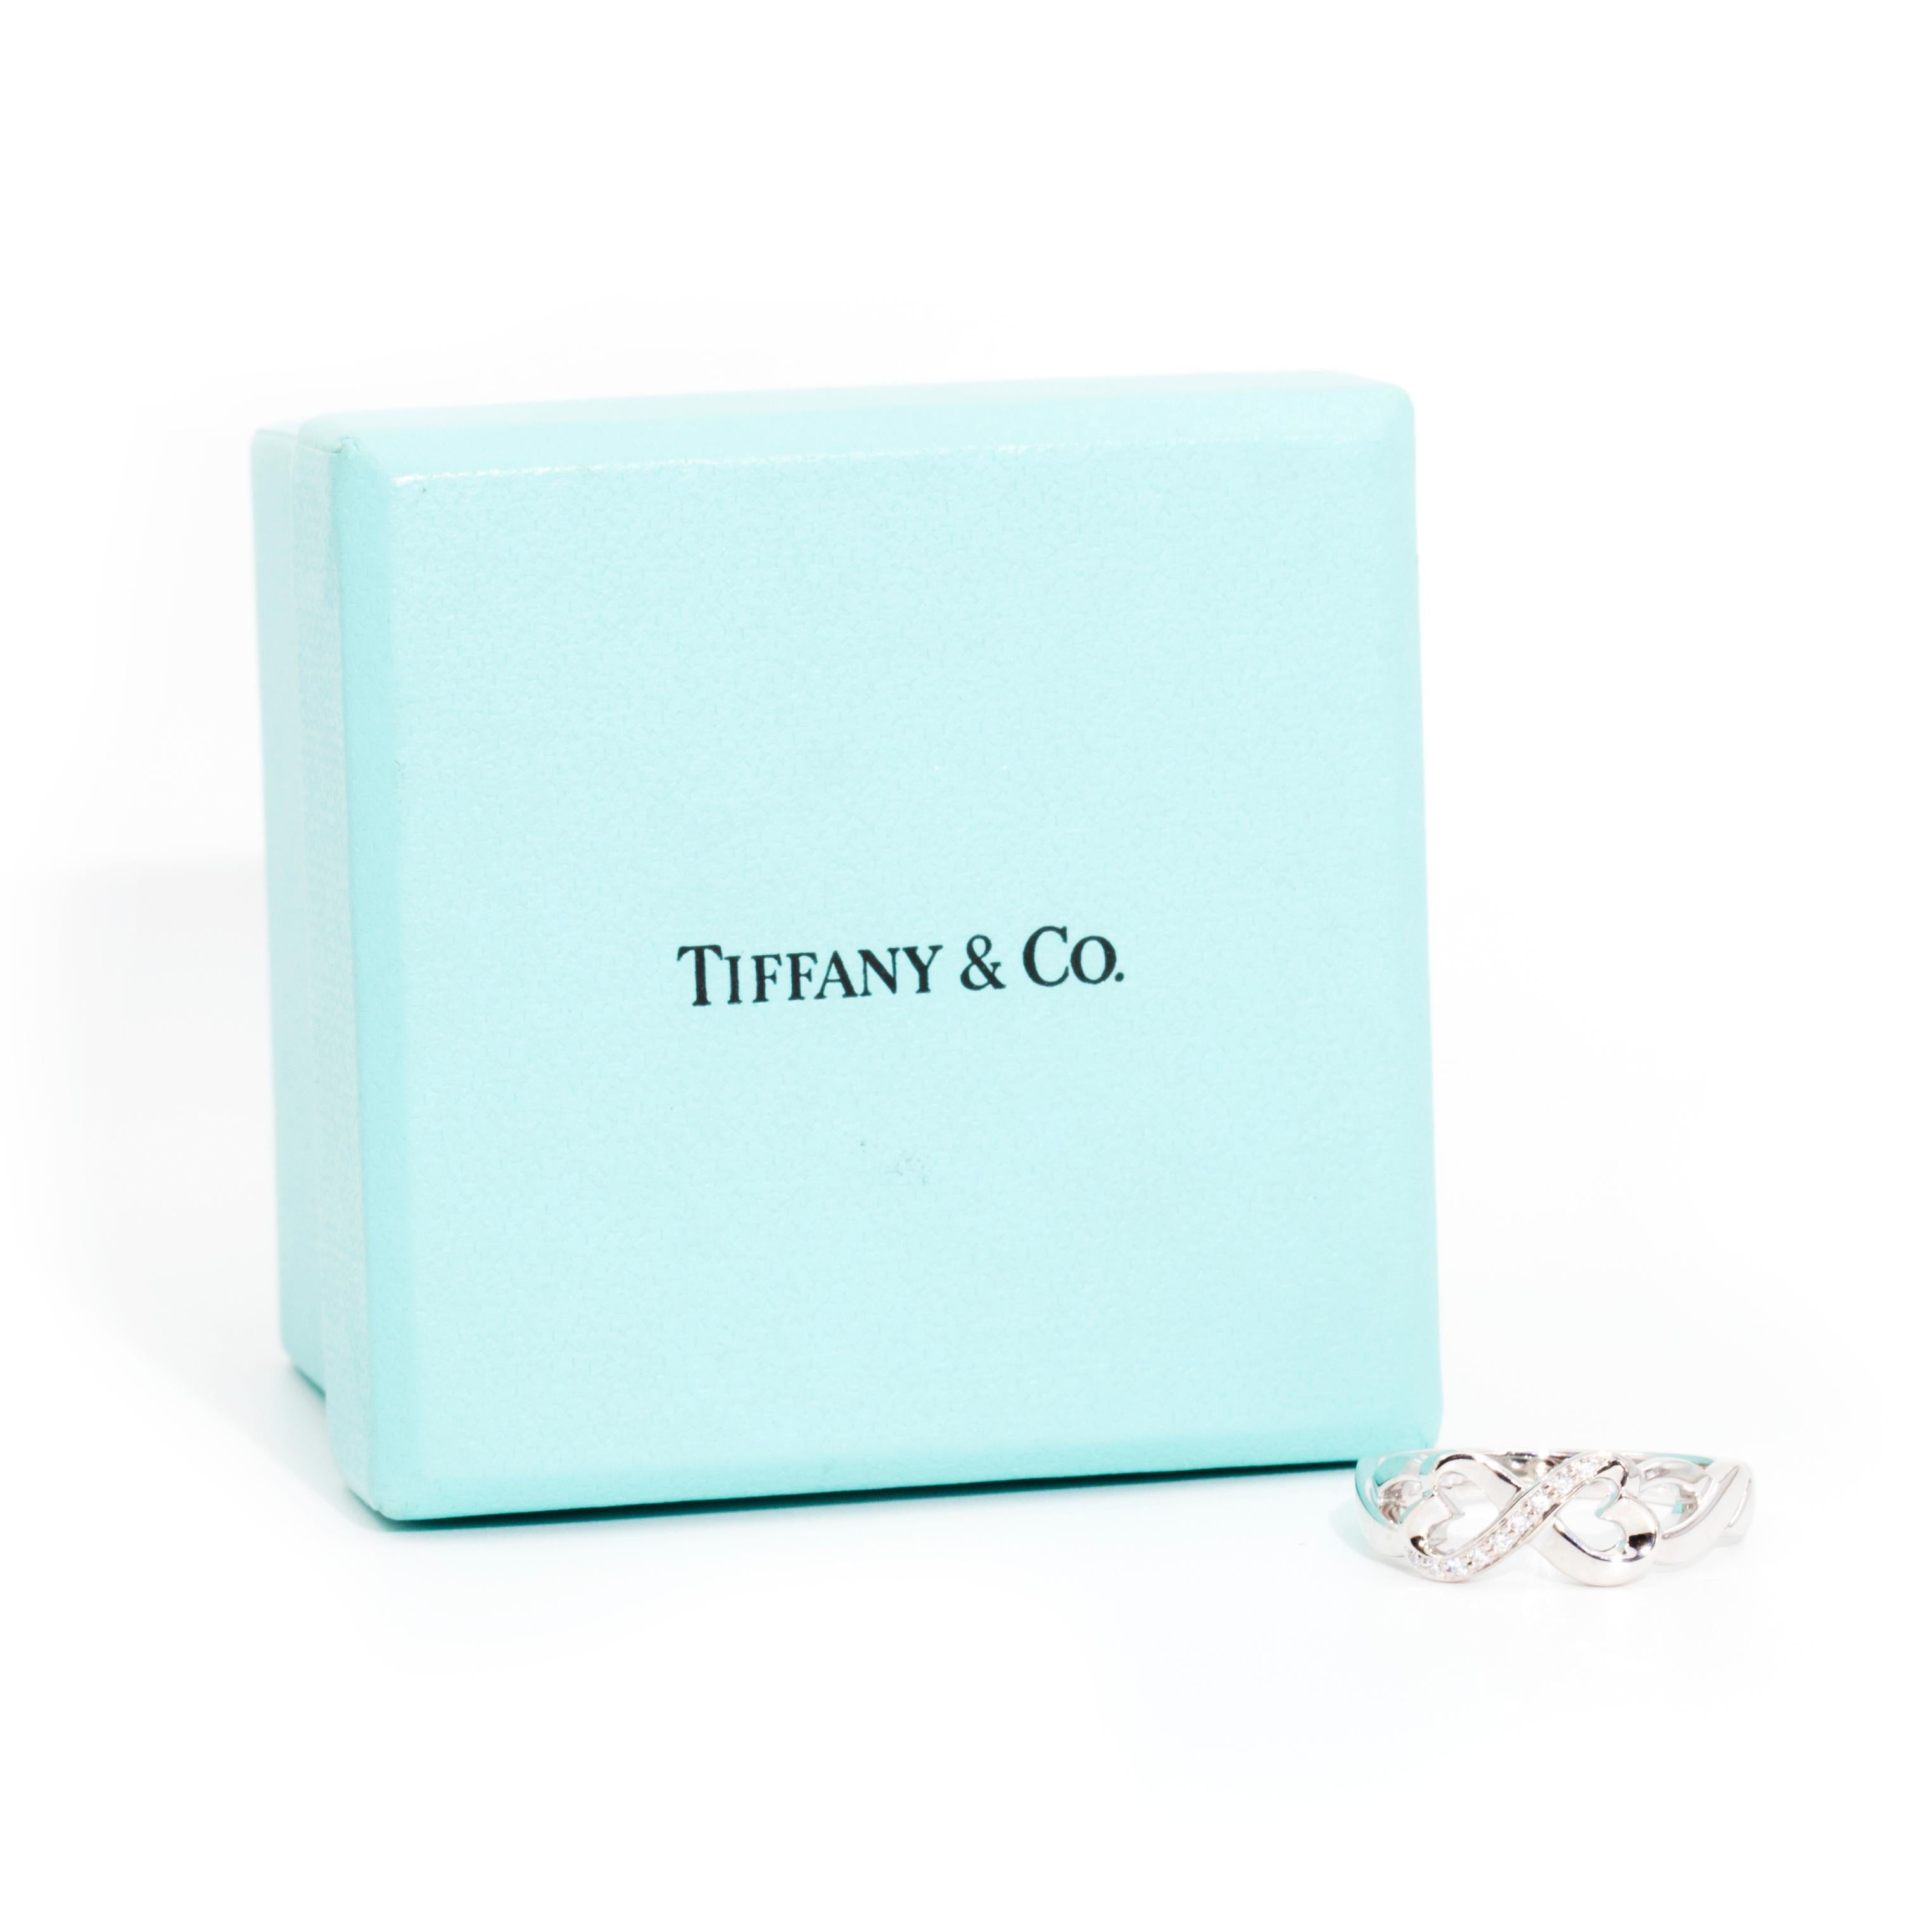 Tiffany & Co. Palomo Picasso Vintage Twisting Heart Ring in 18 Carat White Gold 9